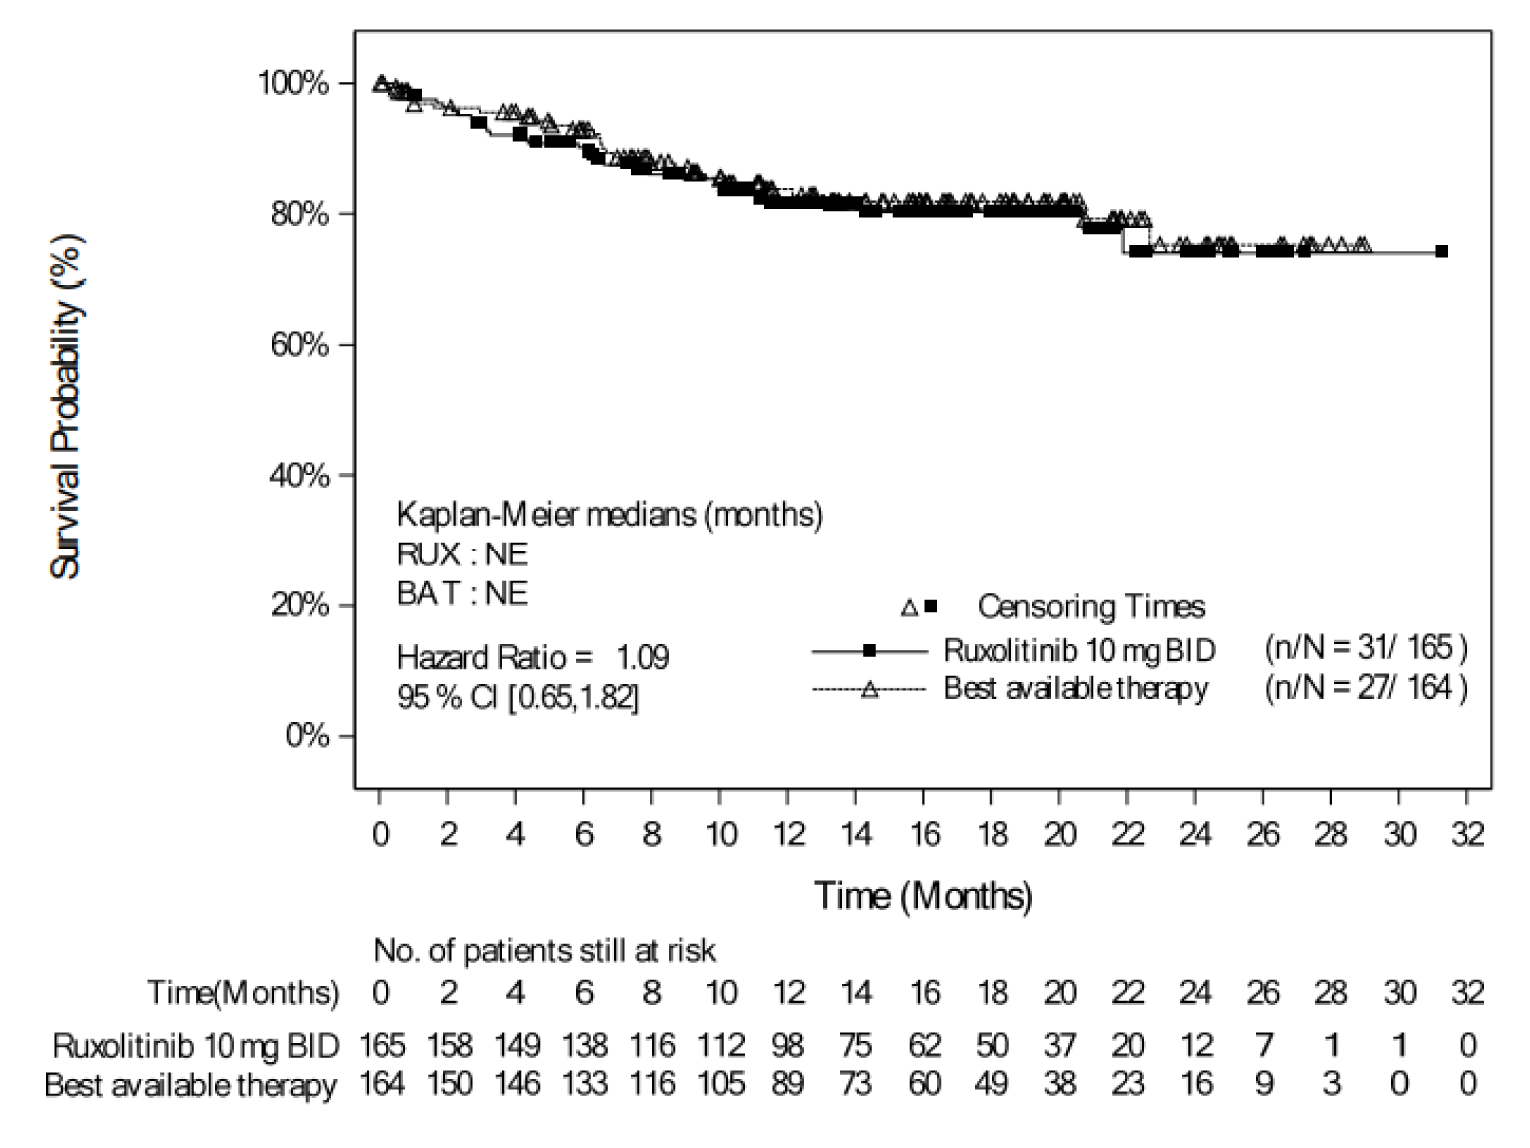 Line graph depicting the duration of treatment for ruxolitinib and best available therapy arms during the trial period, where duration of treatment curves approximately overlap throughout the 28 months of follow-up.